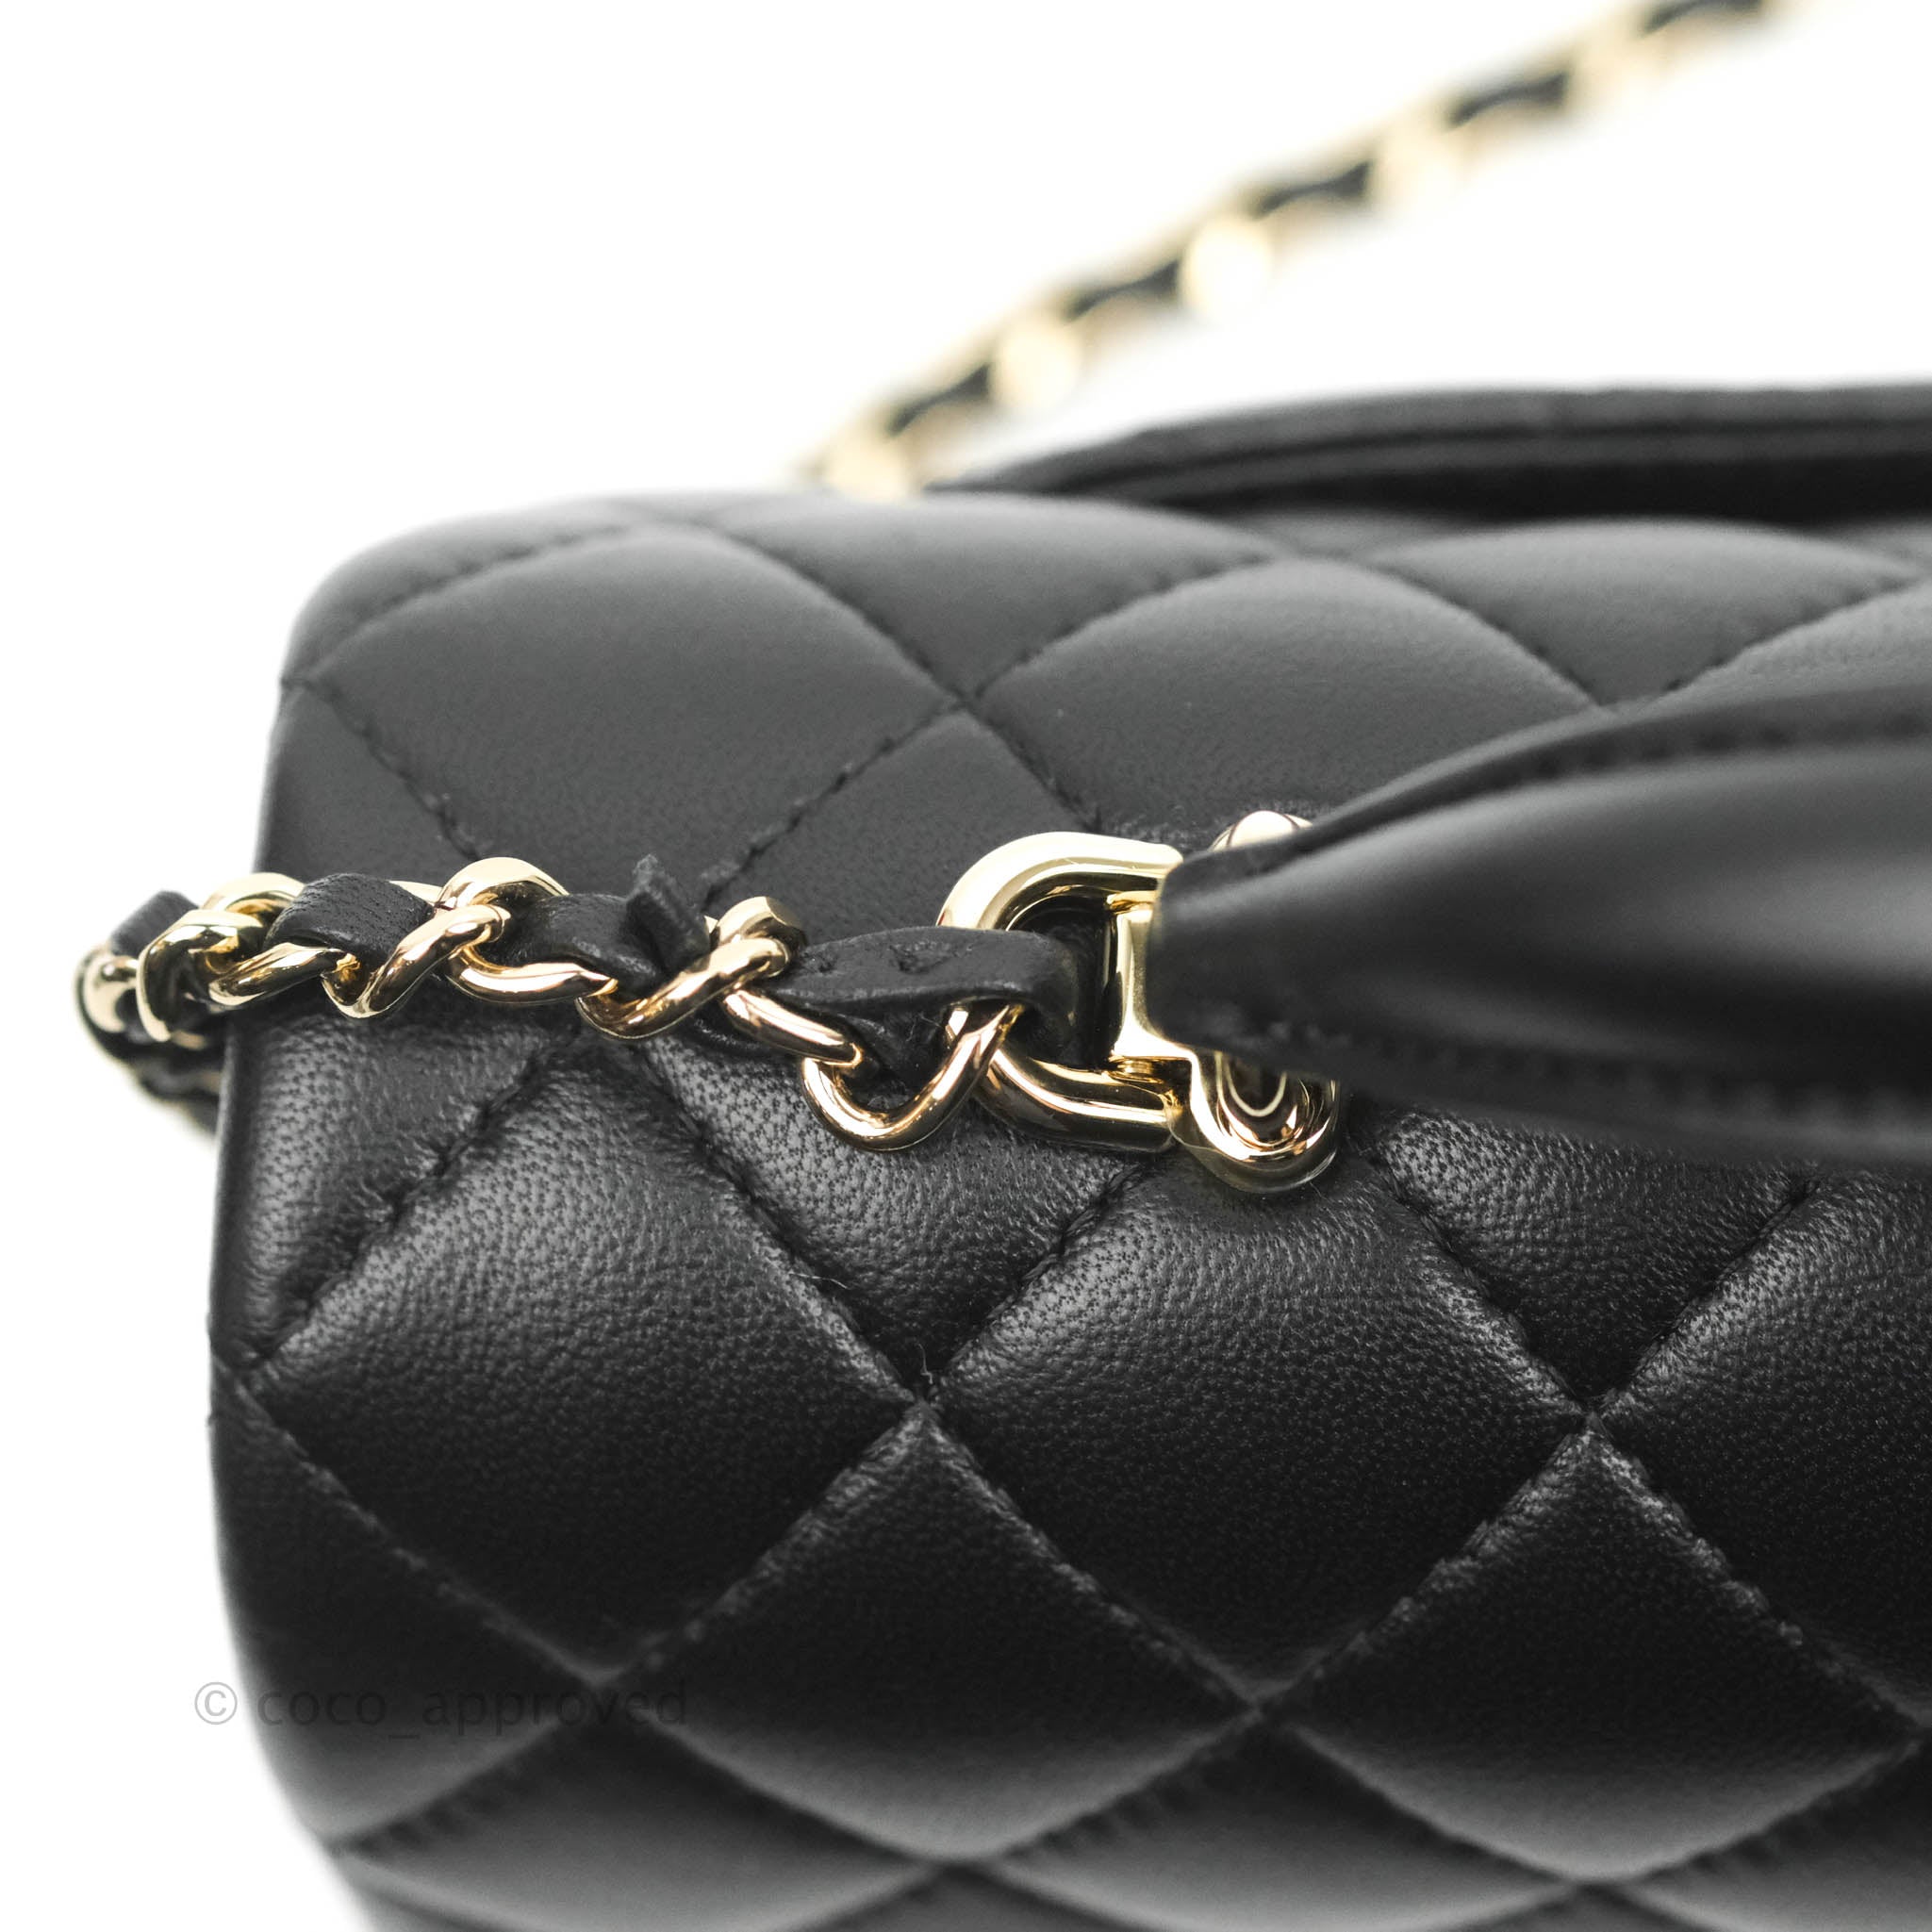 Chanel Top Handle Mini Rectangular Flap Bag with Charm Black Lambskin – Coco  Approved Studio